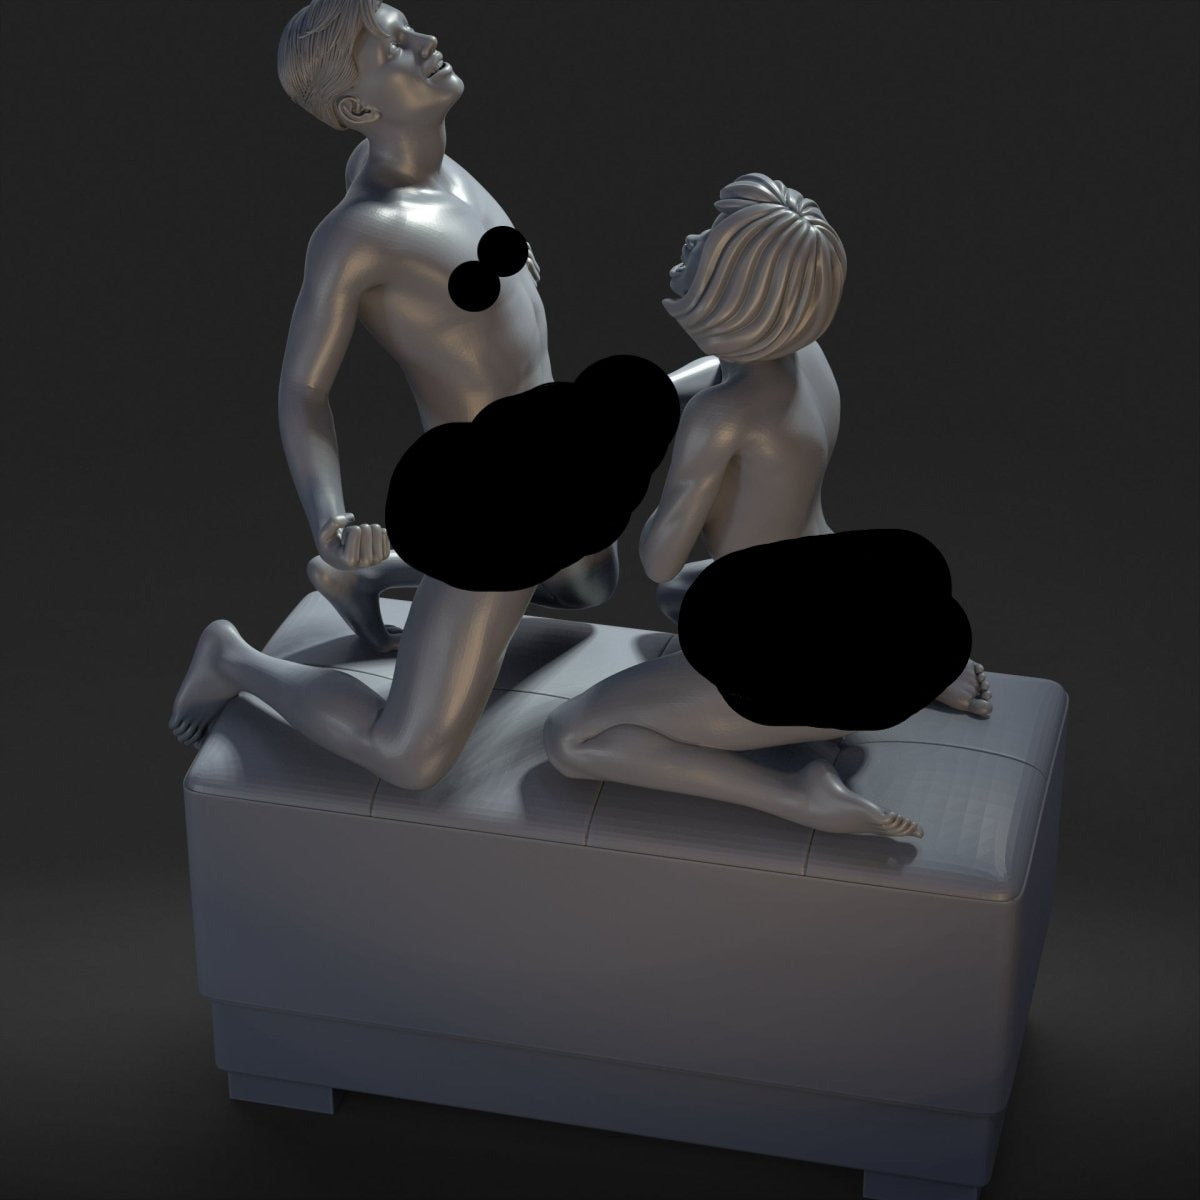 Couple 21 Mature 3d Printed miniature FanArt by Masters Of Prints Collectables Statues & Figurines